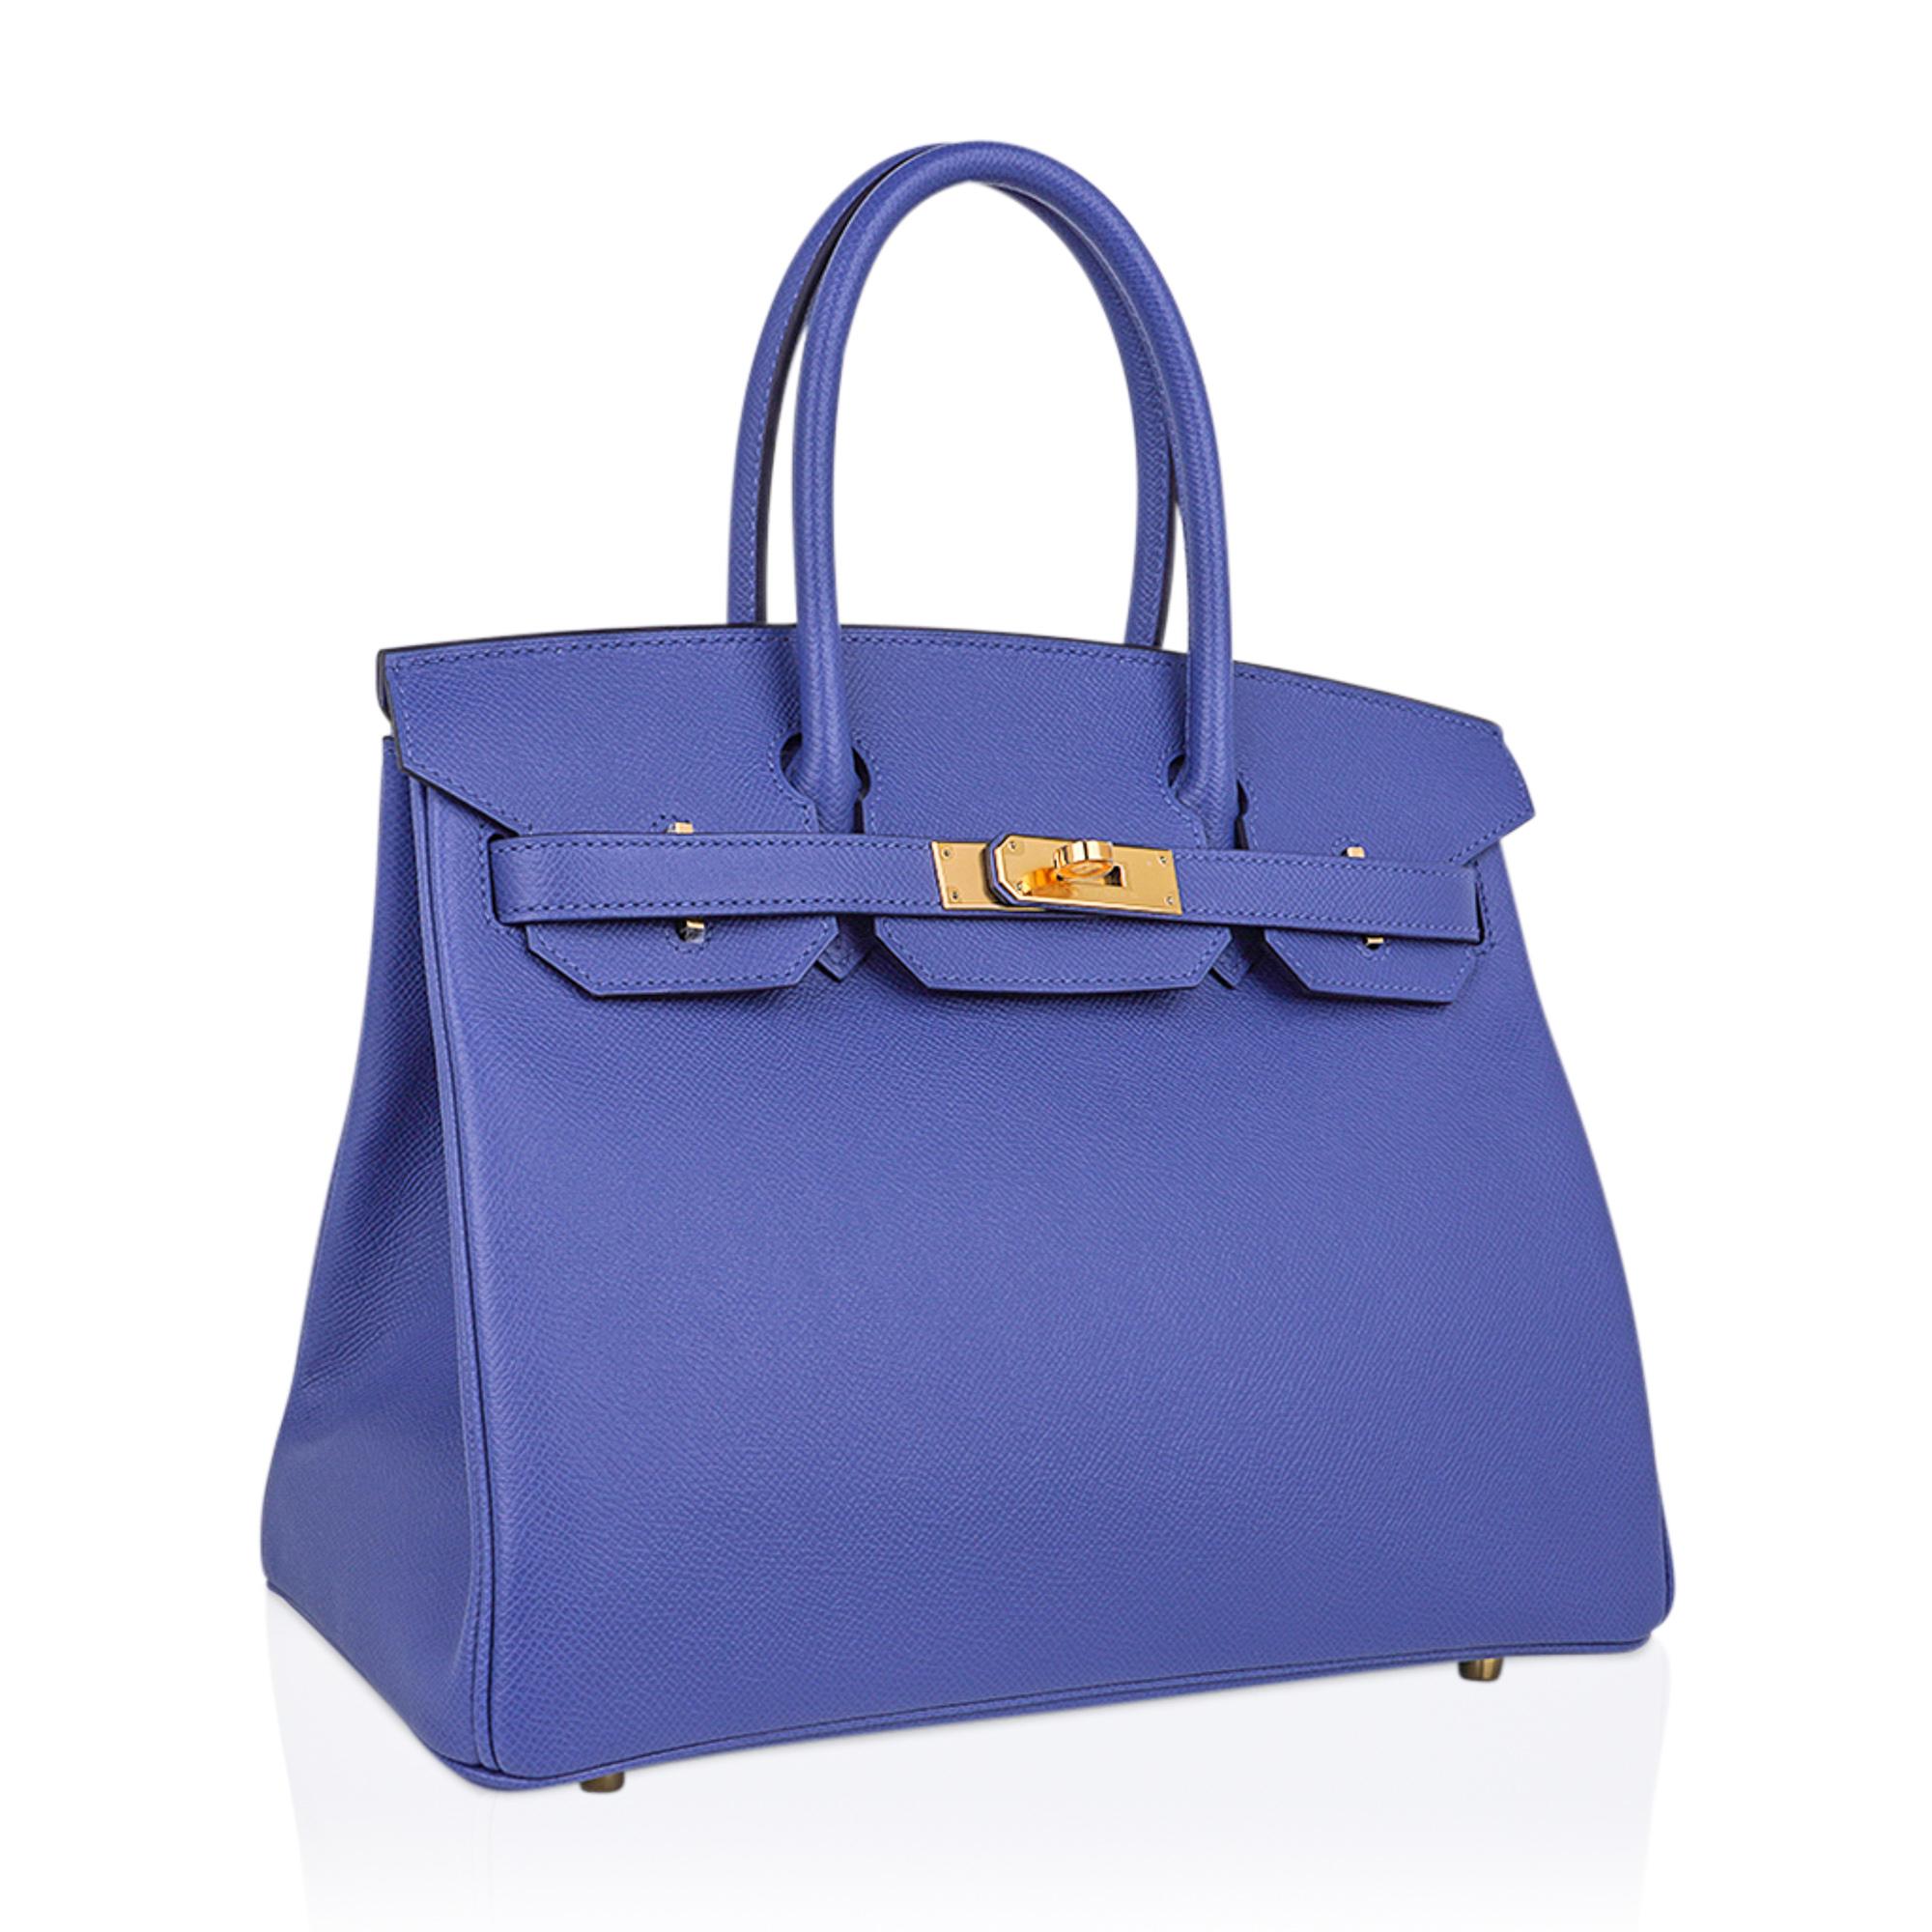 Mightychic offers an Hermes Birkin 30 bag featured in rare Bleu Brighton.
This stunning blue has a soft lavender undertone and will remind you of a beautiful periwinkle.
This sought after Hermes Birkin bag is exquisite in Epsom leather.
Accentuated